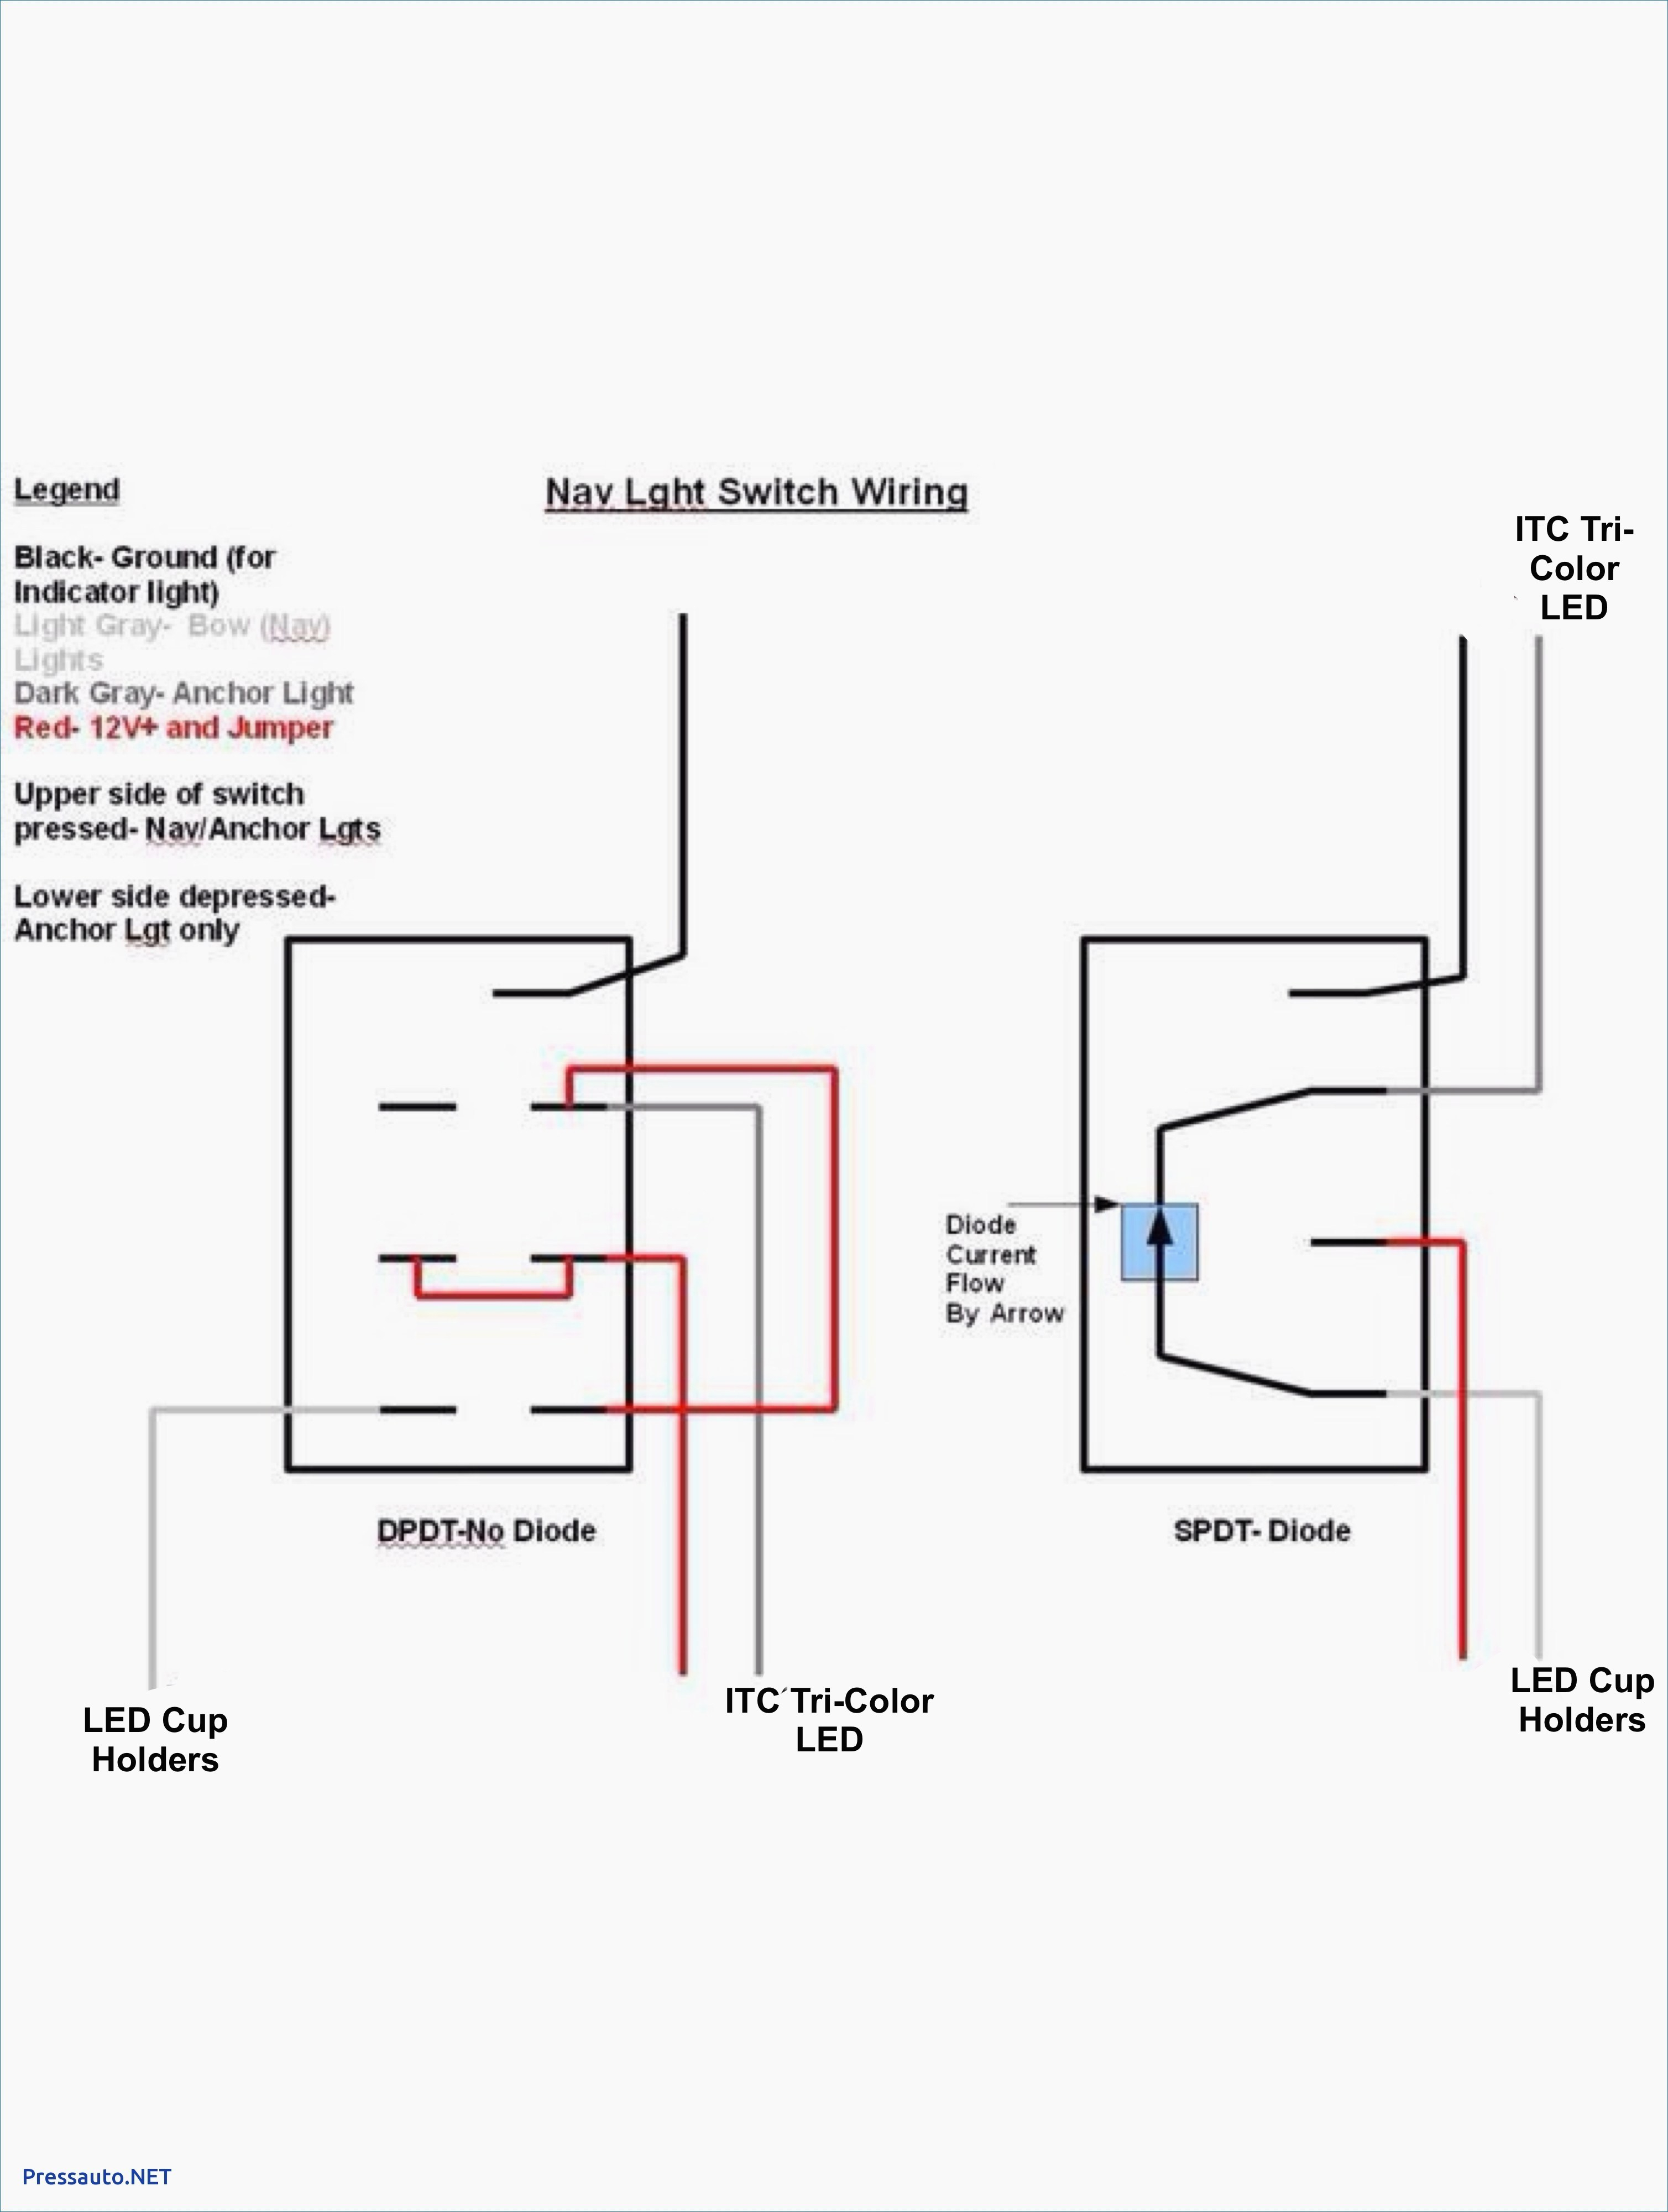 Light Switch Wiring Diagram Back Gt Imgs For Gt Light Switch Wiring Single Pole Wiring